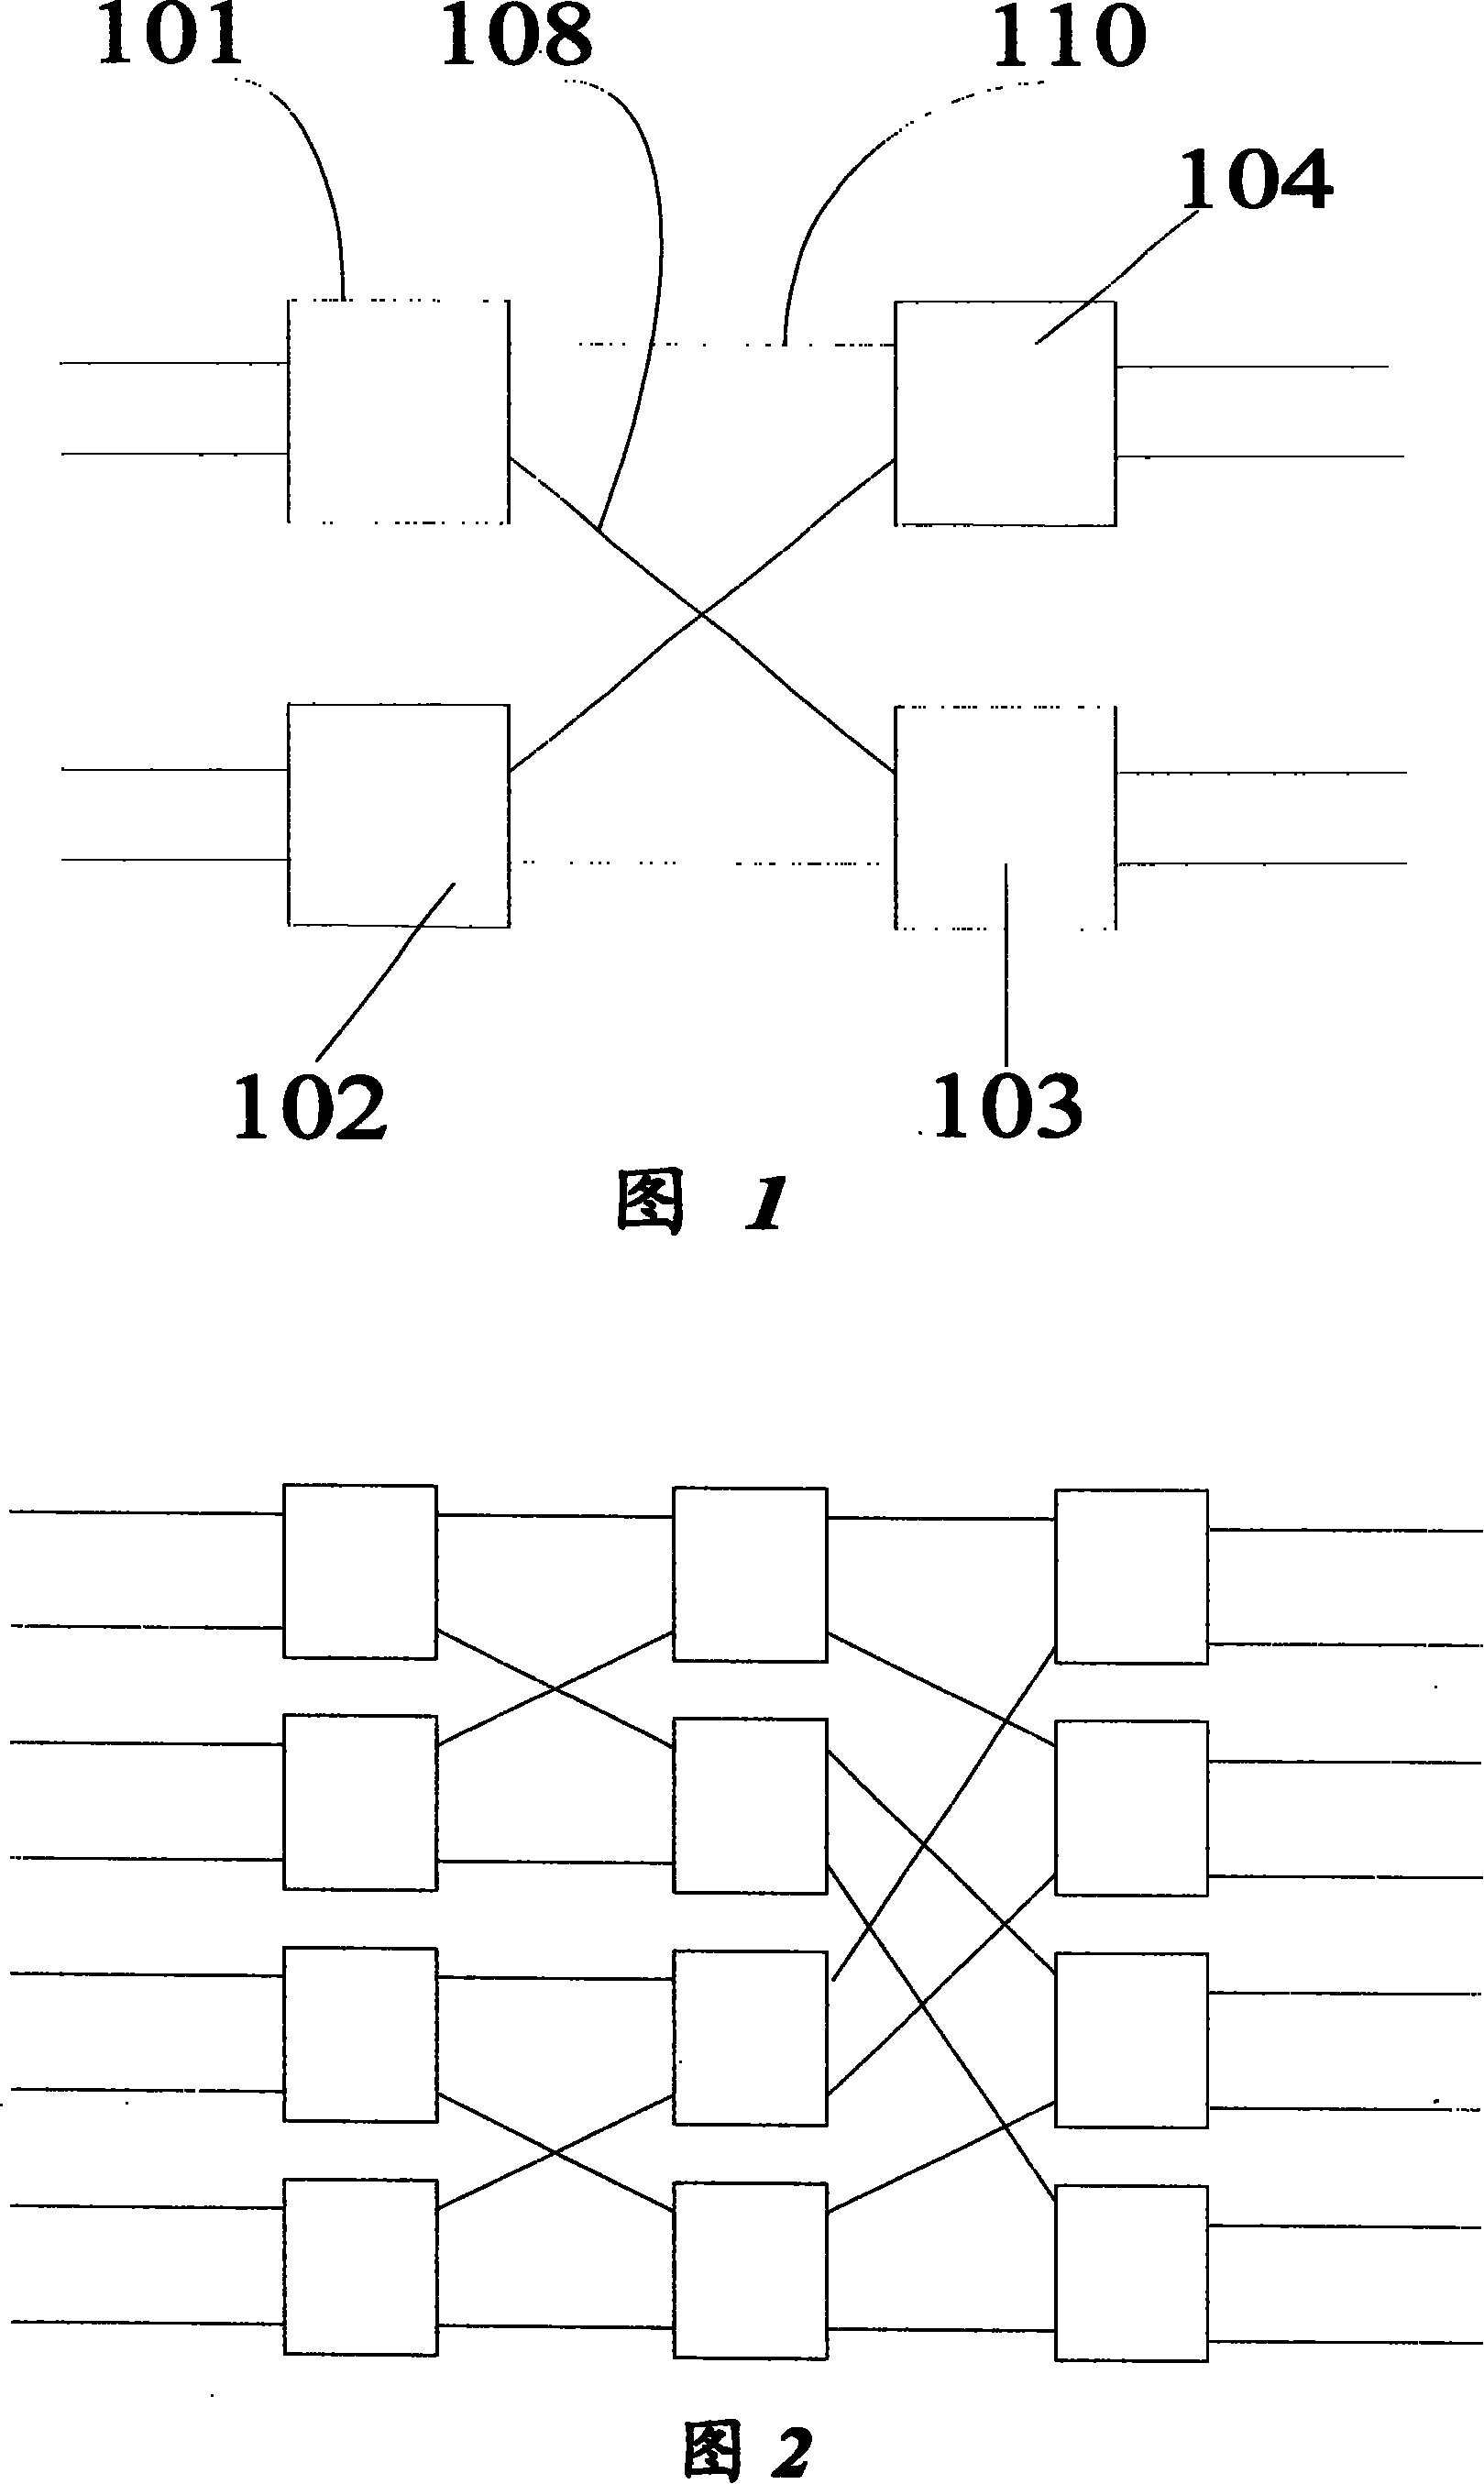 Method for self-routing concentrator to constitute switching structure with division network